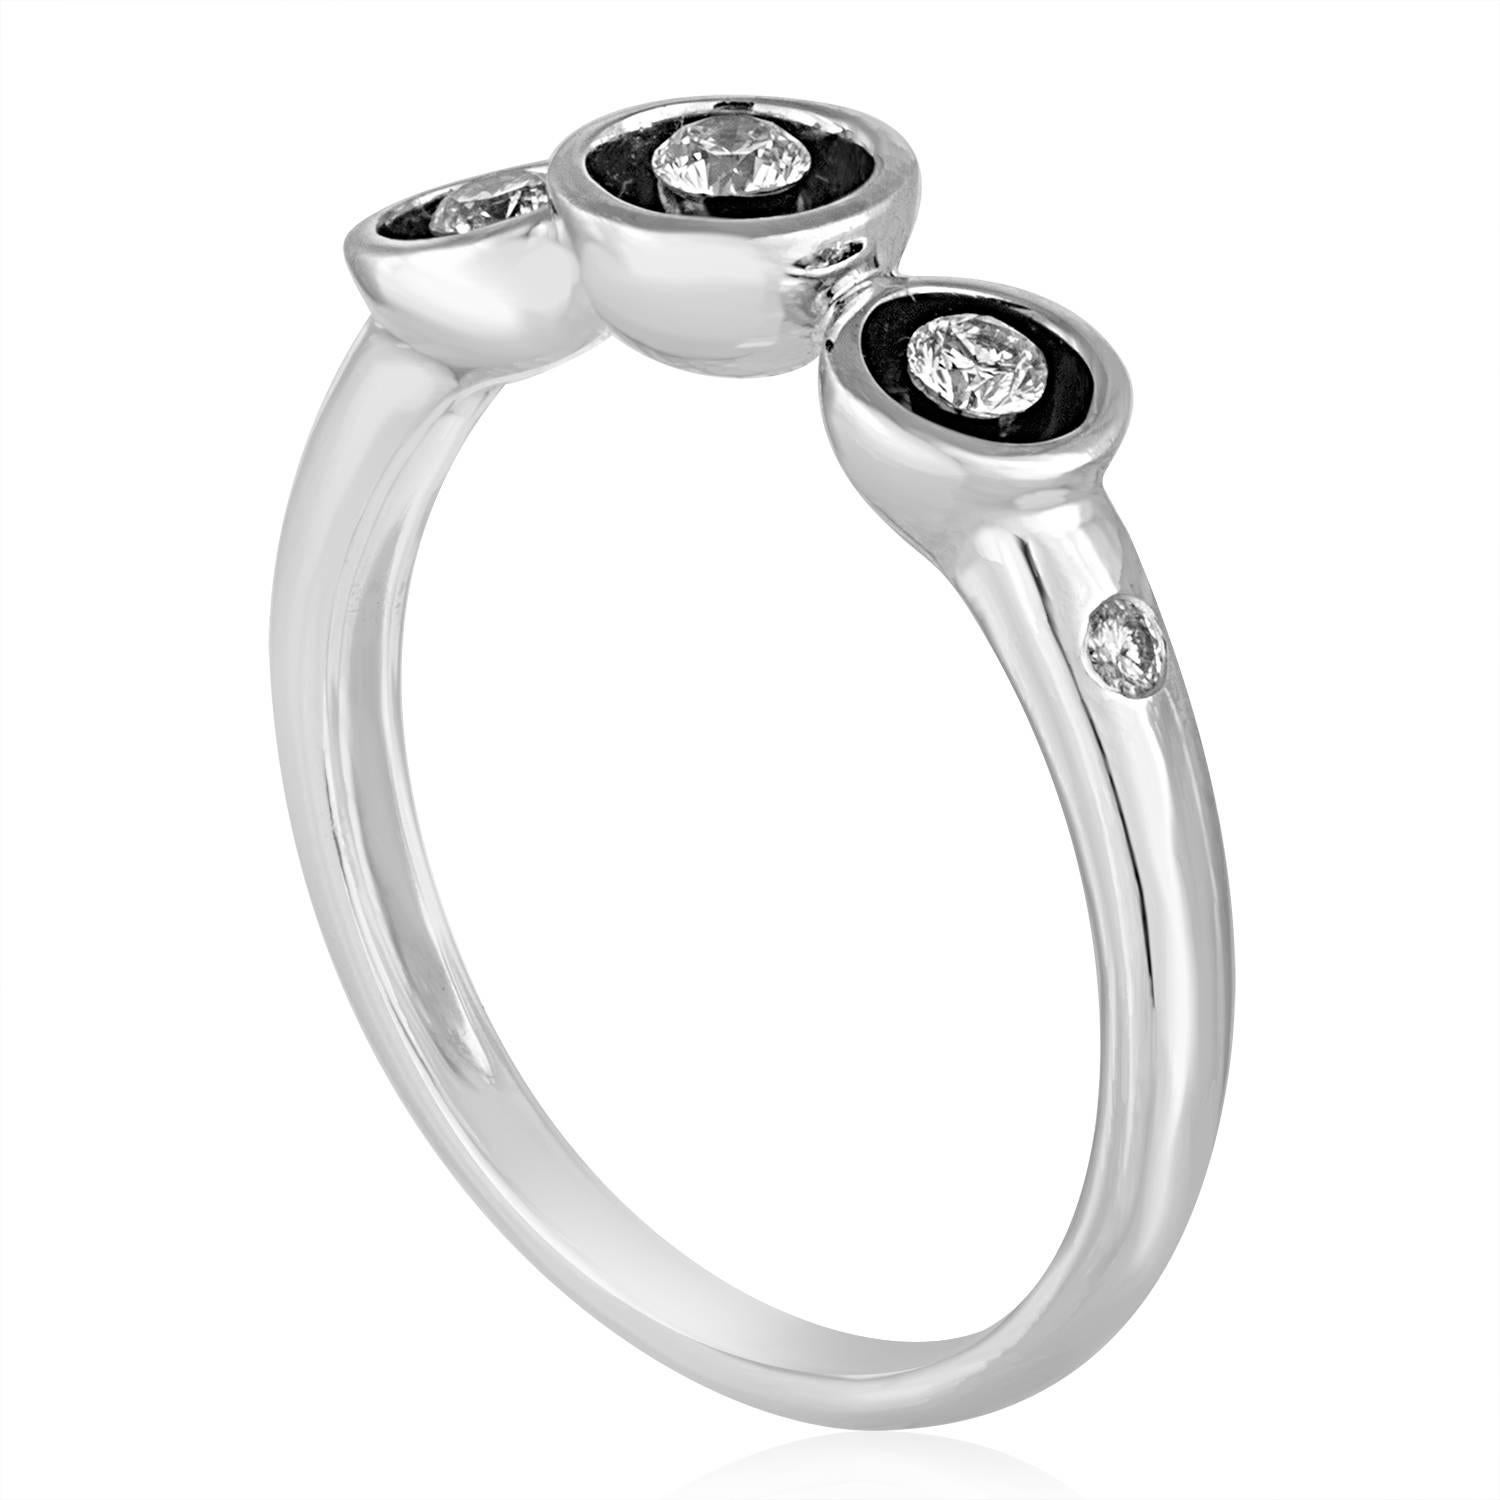 Fun Stackable Ring
The ring is 14K White Gold
There are 0.18 Carats In Diamonds G/H SI
The black enamel is inside the 3 circles
The ring is a size 6.5, sizable
The ring weighs 2.6 grams
